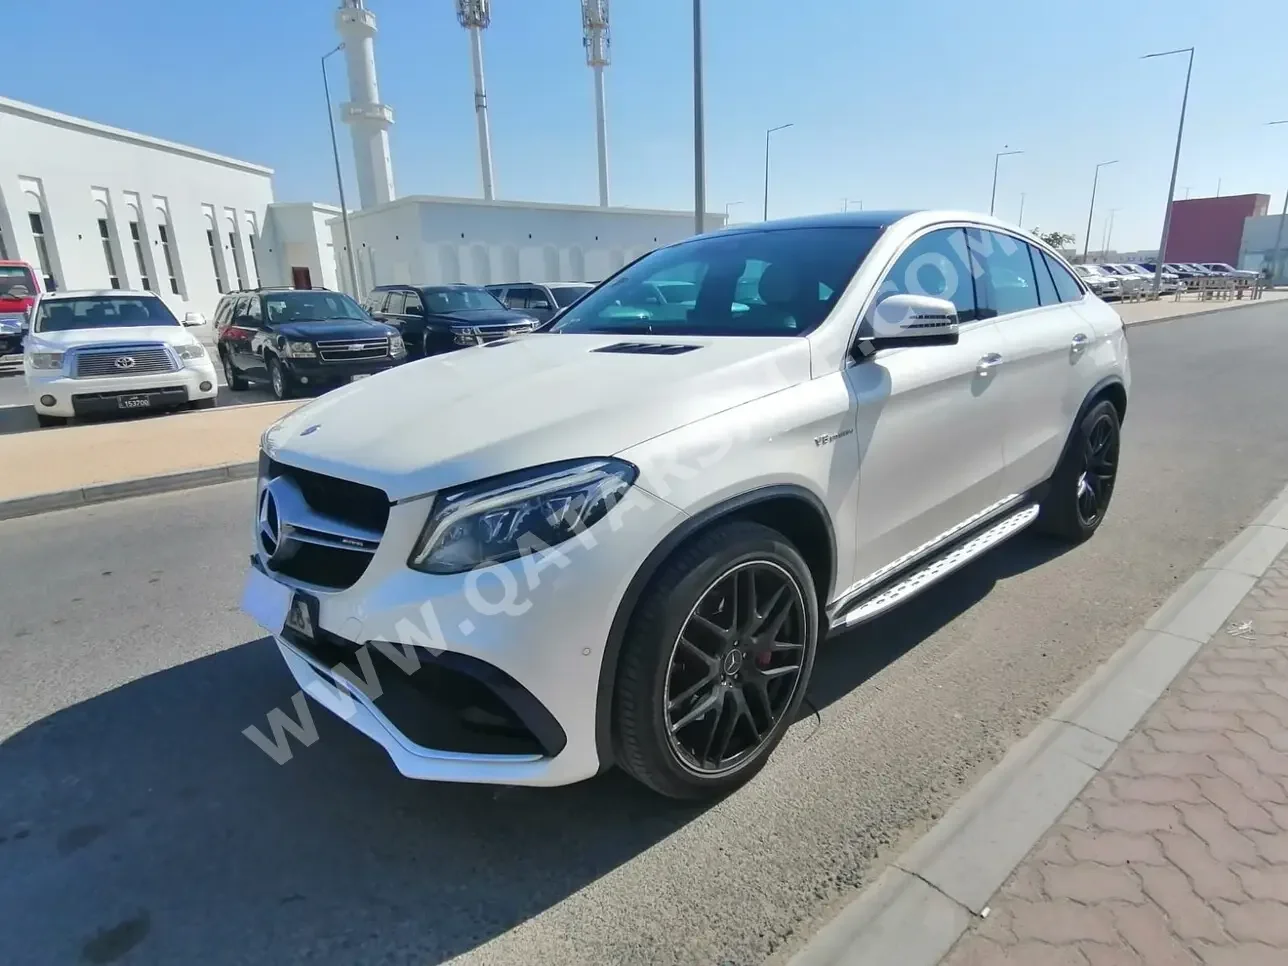 Mercedes-Benz  GLE  63S AMG  2016  Automatic  93,000 Km  8 Cylinder  Four Wheel Drive (4WD)  SUV  White